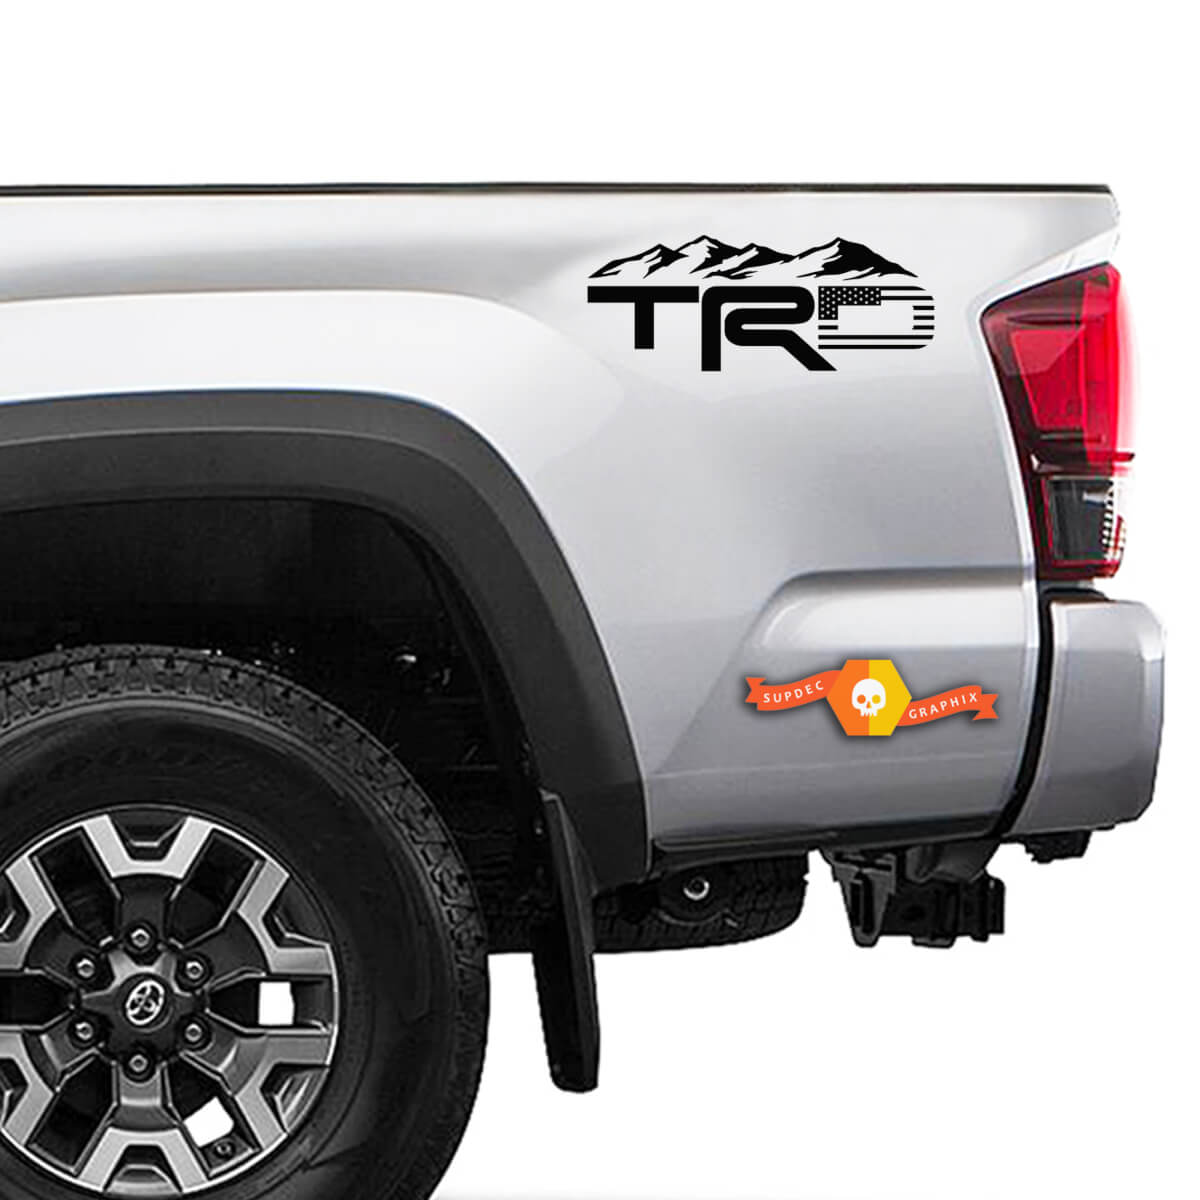 TRD Mountain American Flag Decals Stickers Vinyl Bedsides Toyota Truck Tacoma Tundra Off Road Sport Graphic